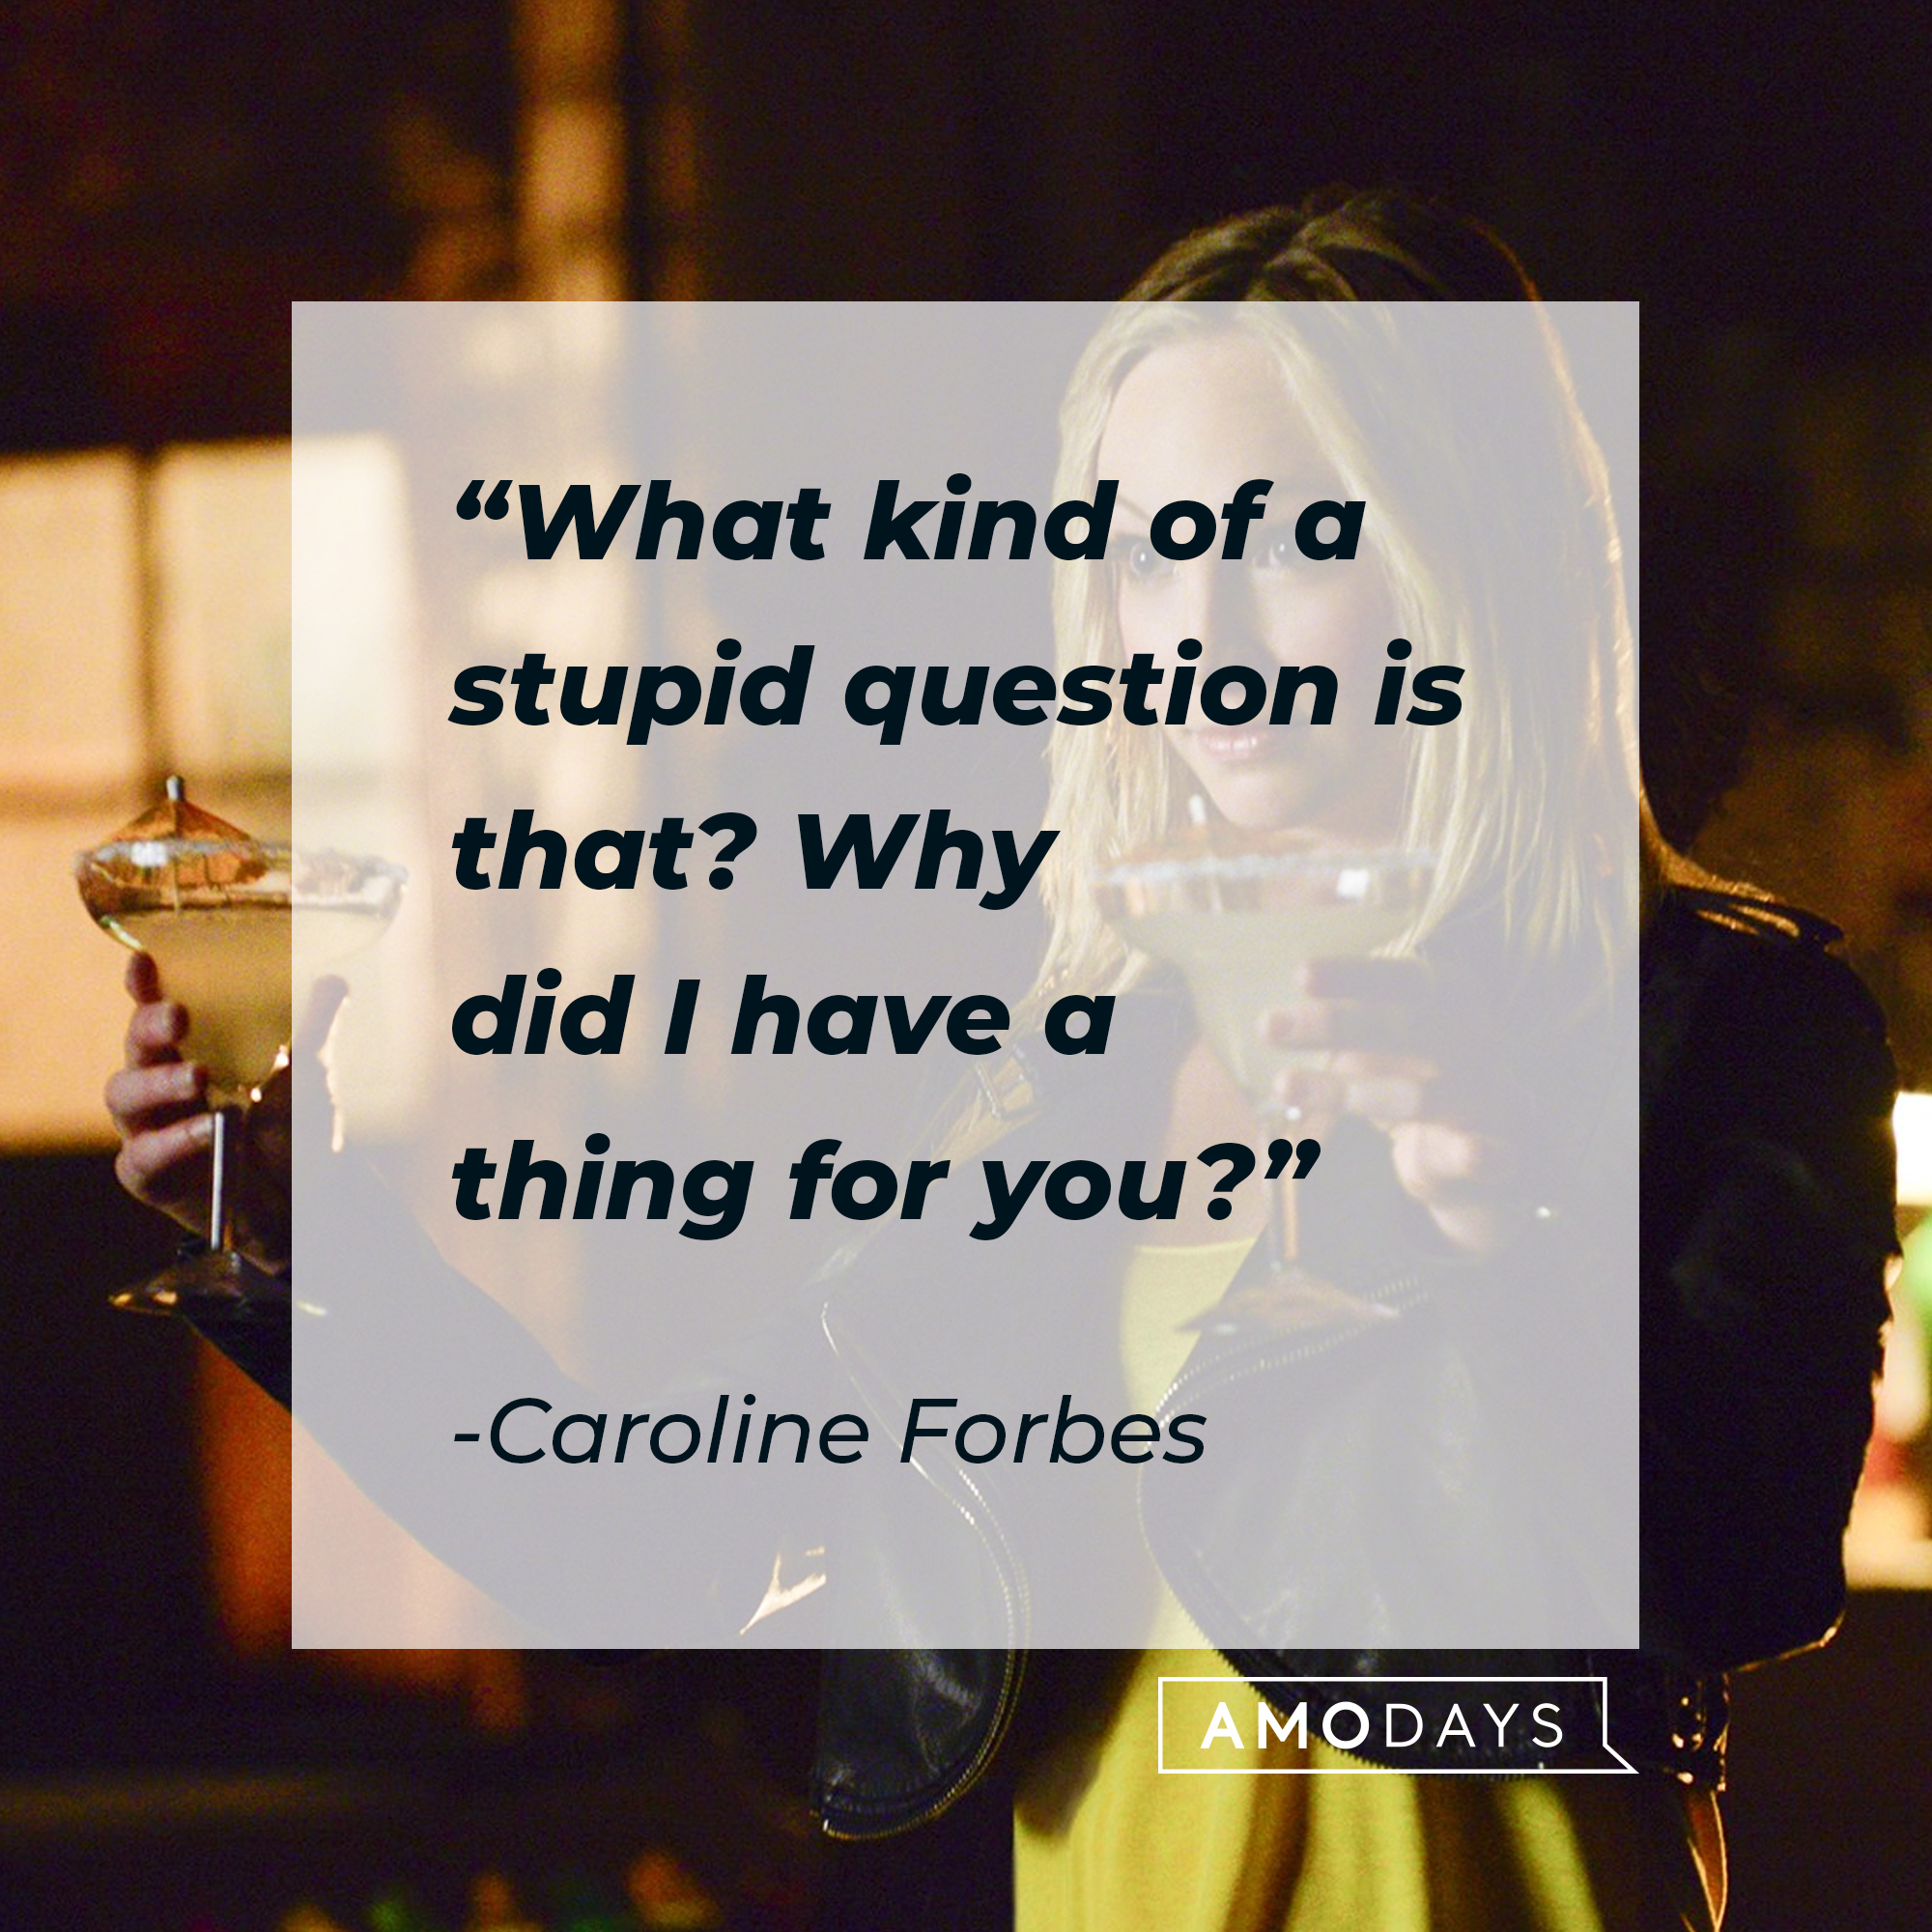 Caroline Forbes' quote: "What kind of a stupid question is that? Why did I have a thing for you?" | Source: Facebook.com/thevampirediaries